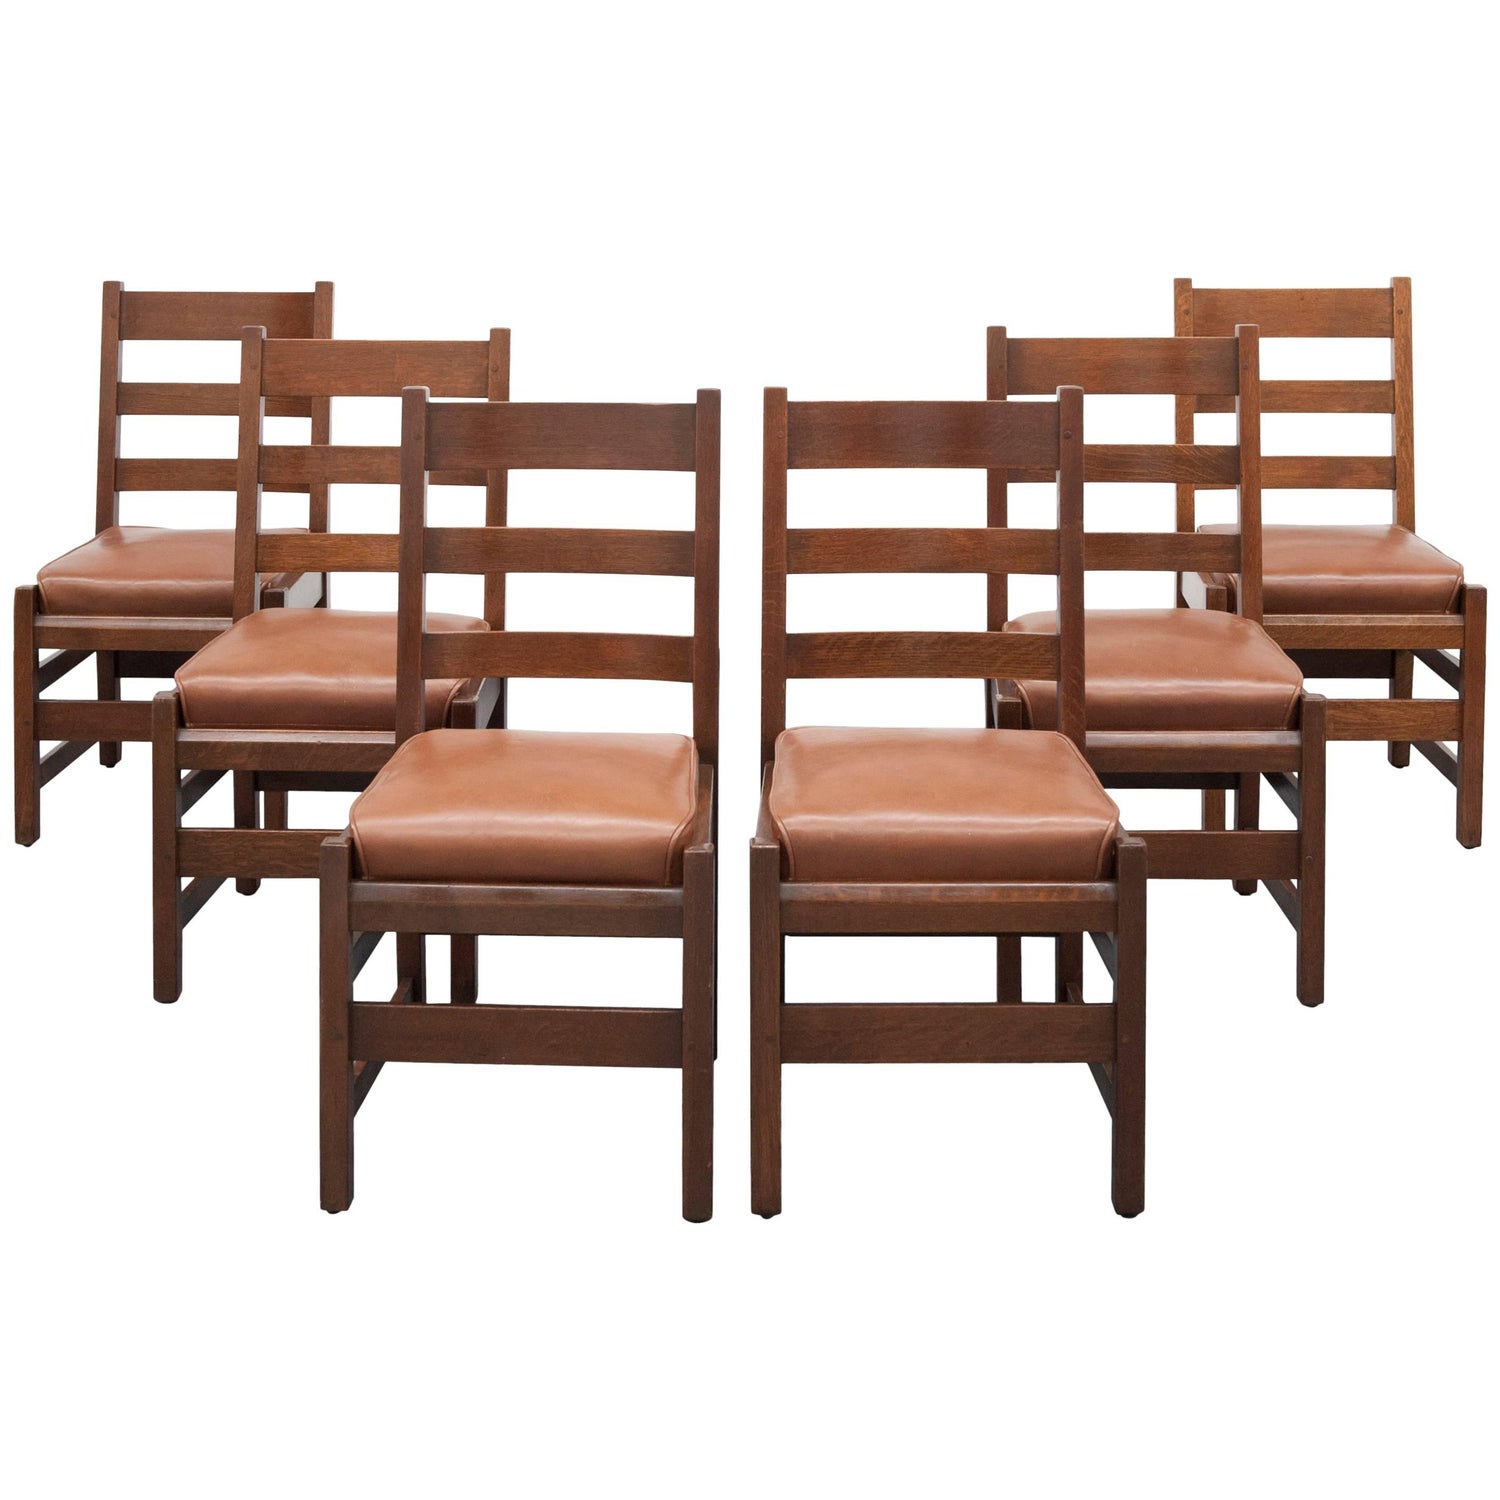 Mission Style Dining Room Chairs : Mission Style Kitchen Chairs Off 55